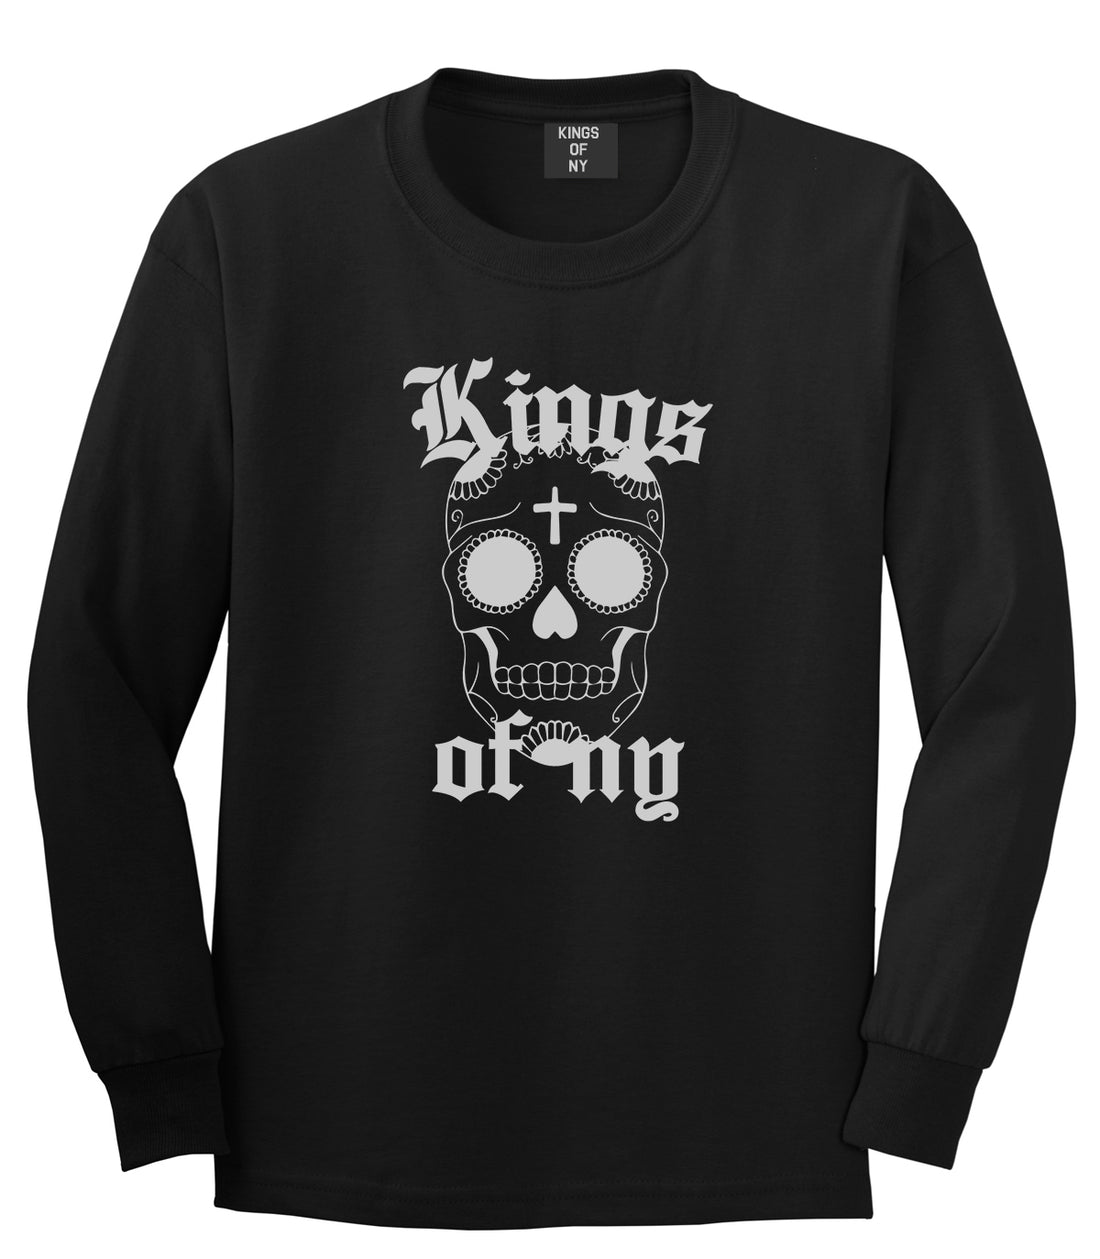 Day Of The Dead KONY Mens Long Sleeve T-Shirt Black by Kings Of NY